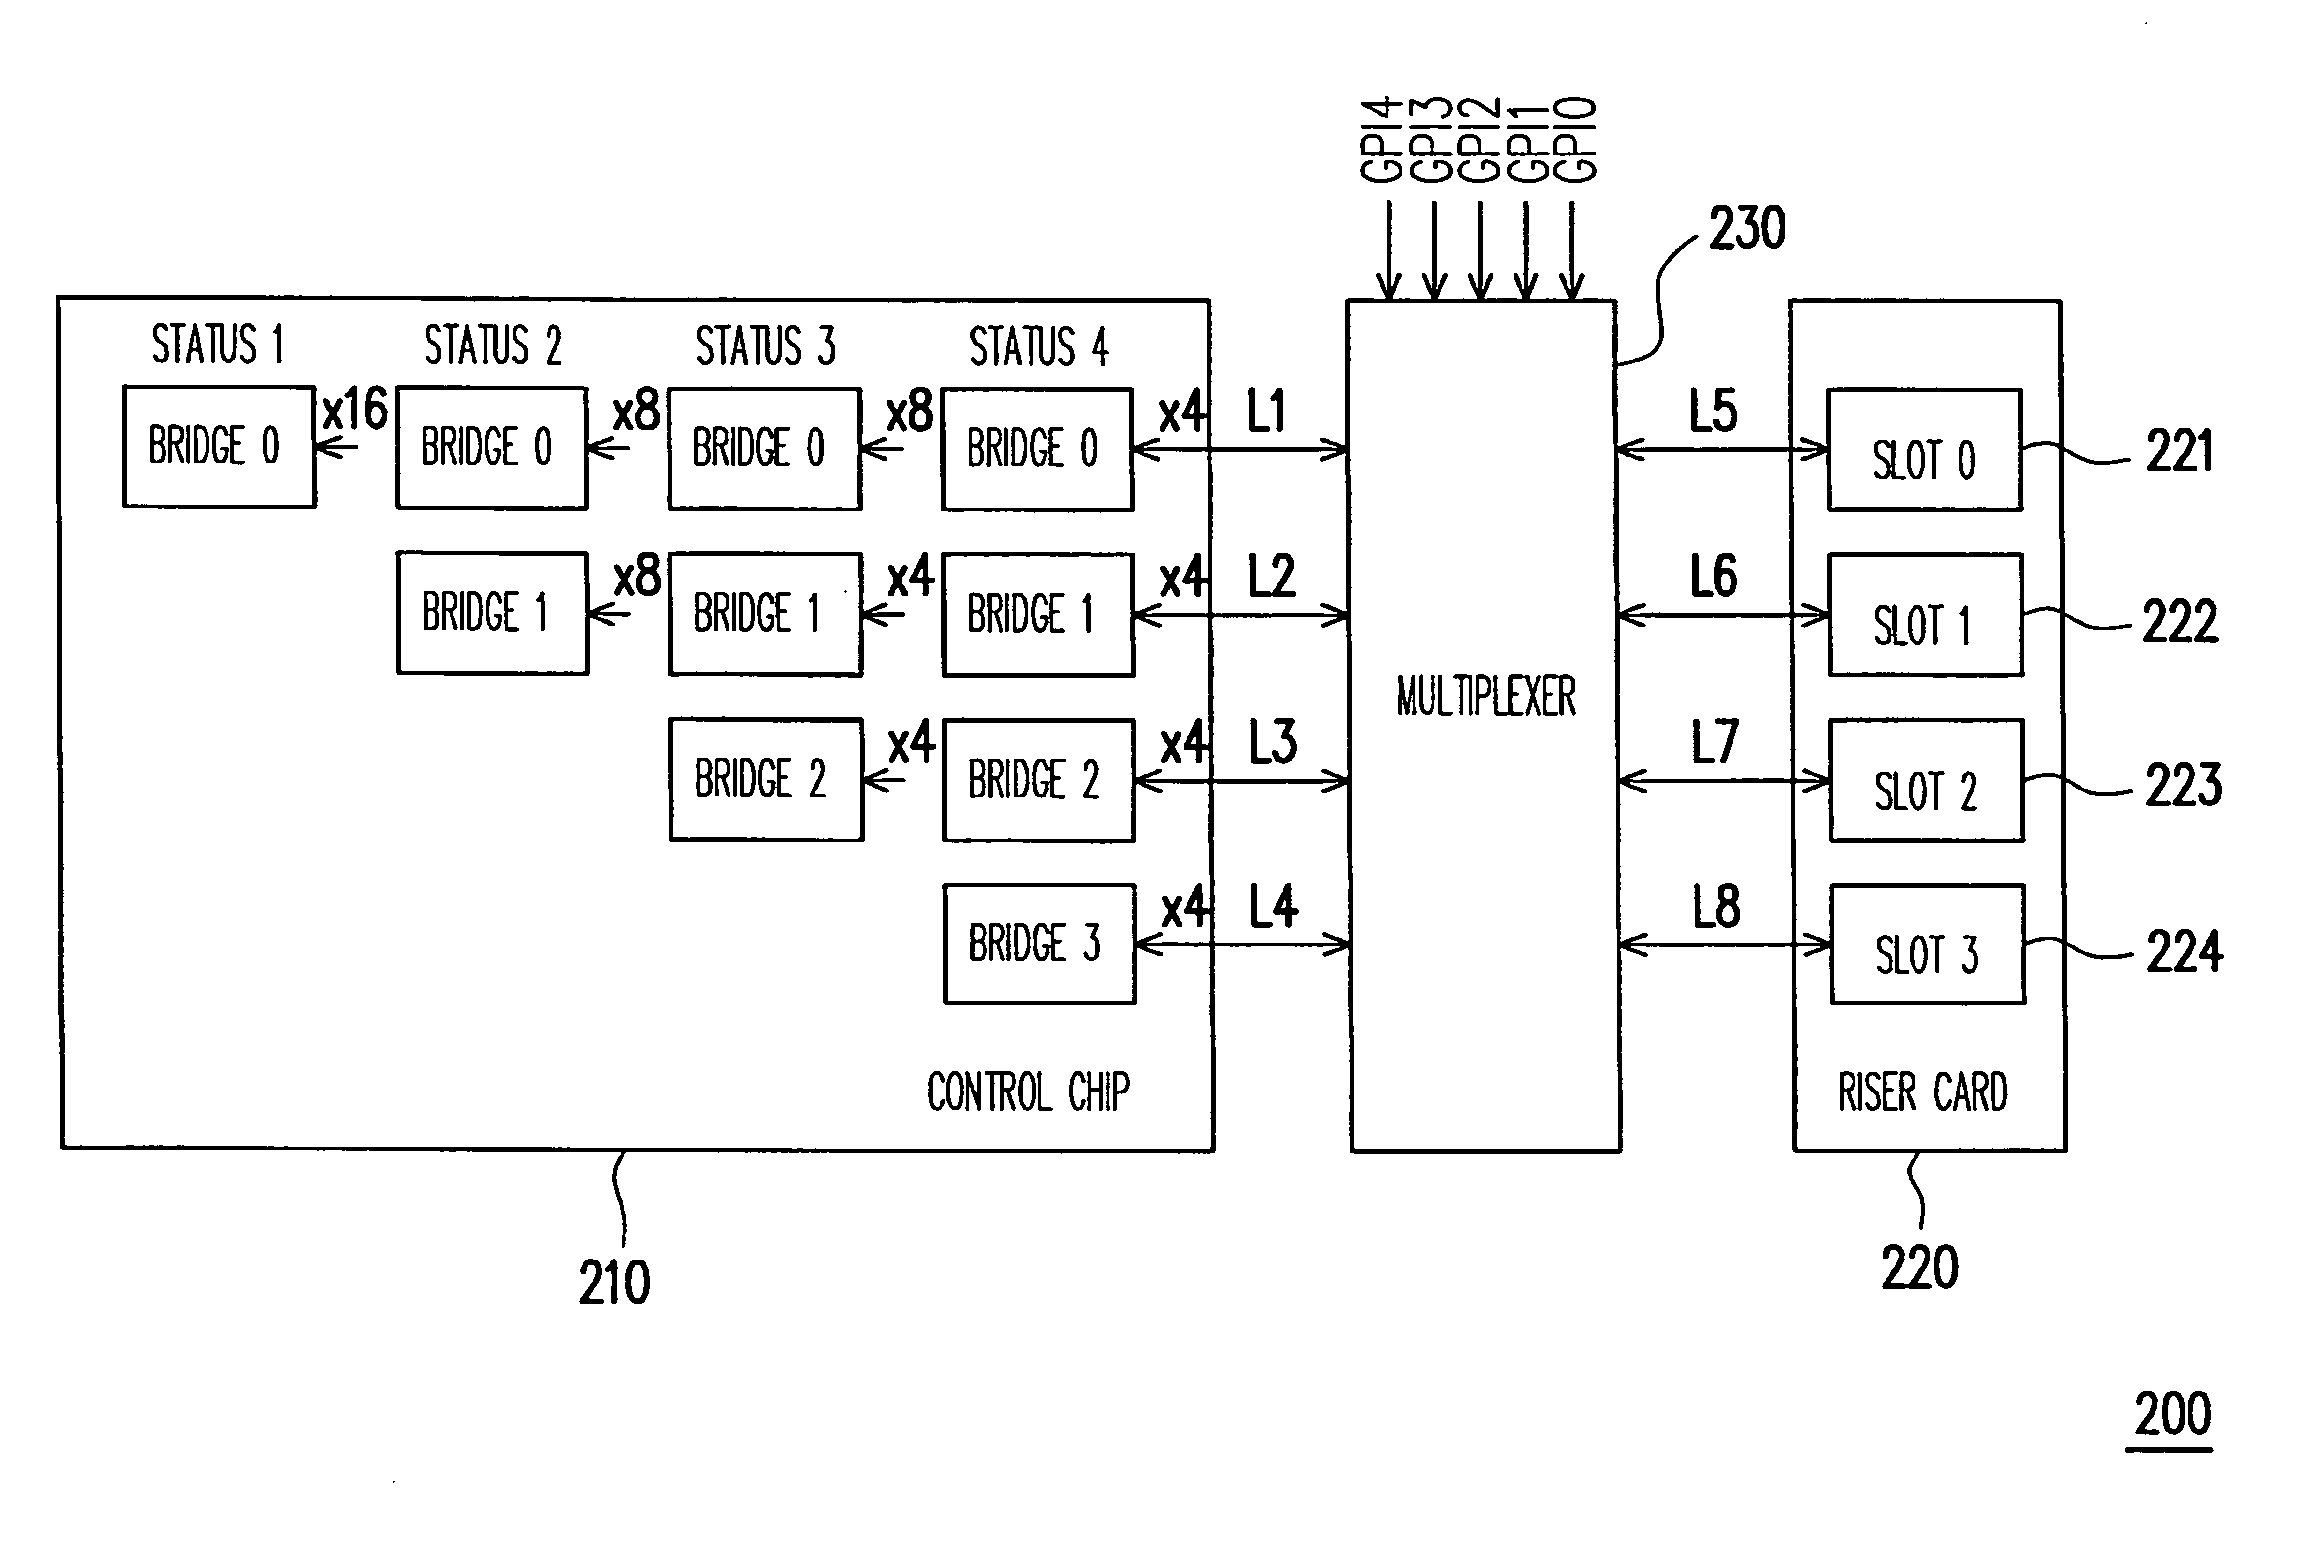 Method for dynamically allocating link width of riser card